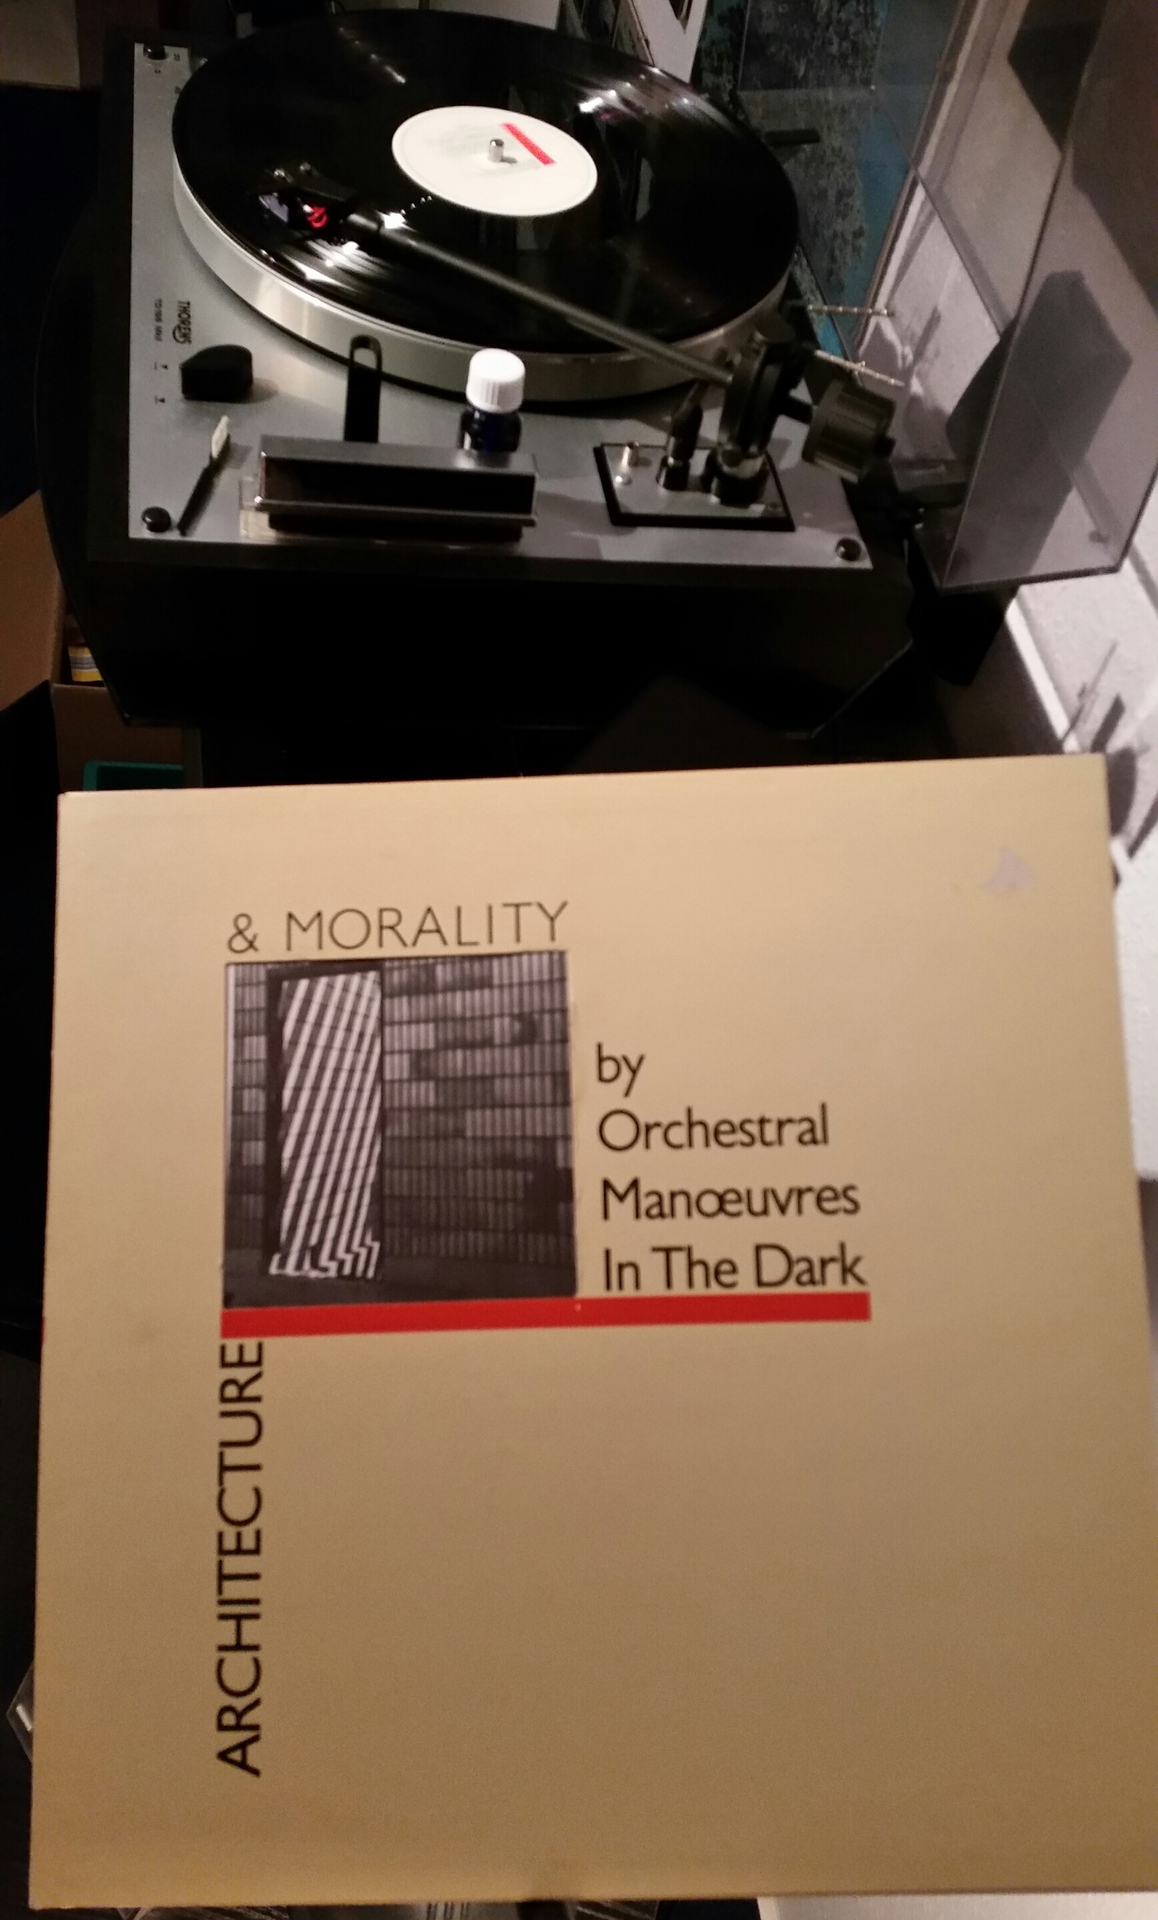 ORCHESTRAL MANOEUVRES IN THE DARK Architecture And Morality (1981 - Orchestral Manoeuvres In The Dark Architecture & Morality